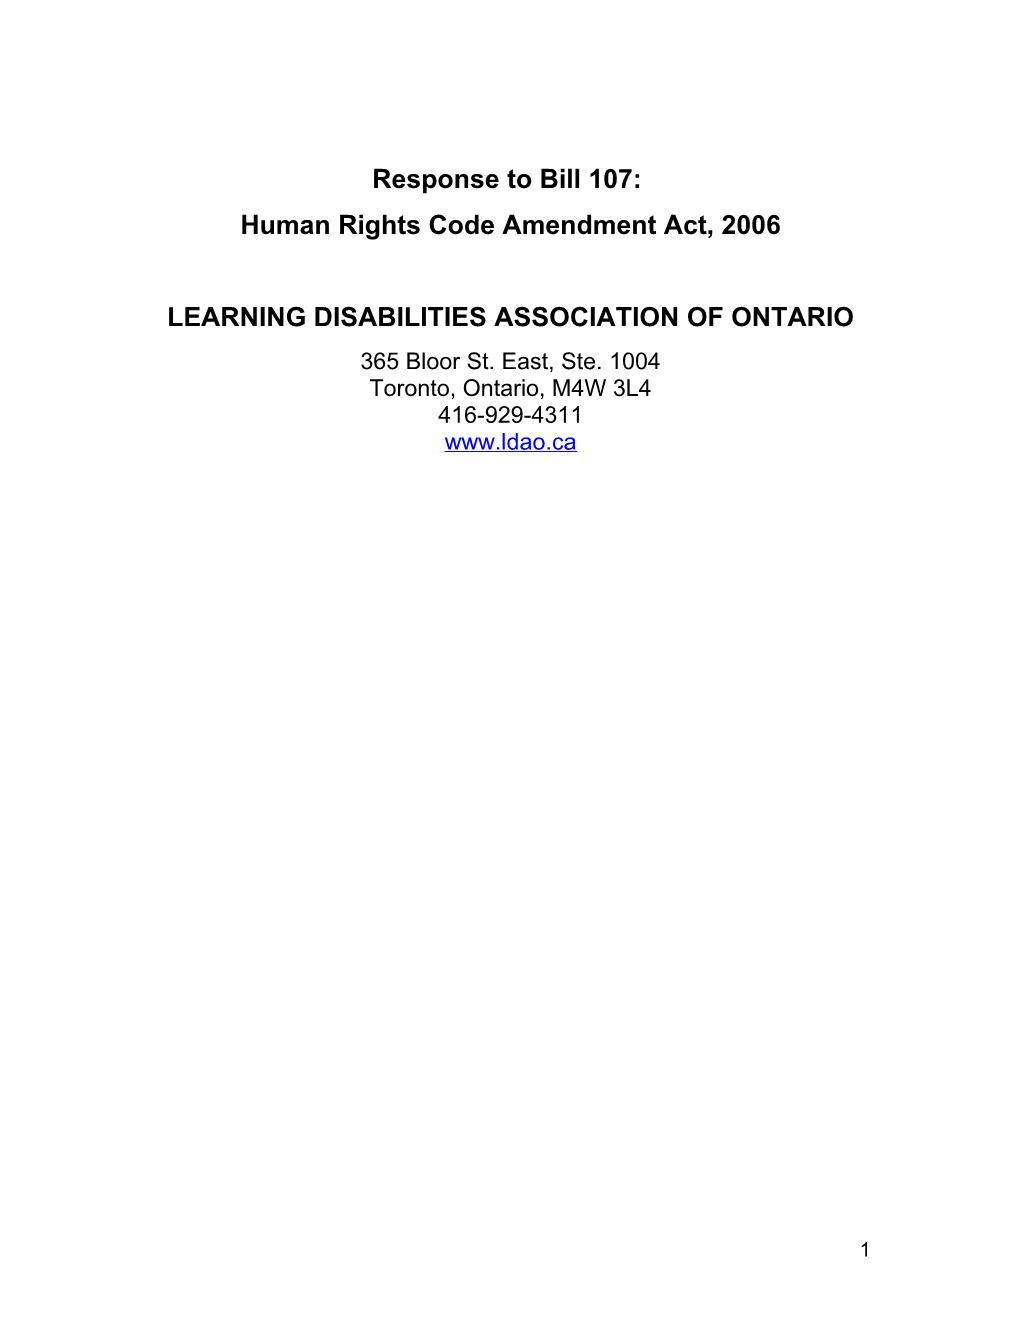 The Learning Disabilities Association of Ontario Welcomes the Opportunity to Comment On